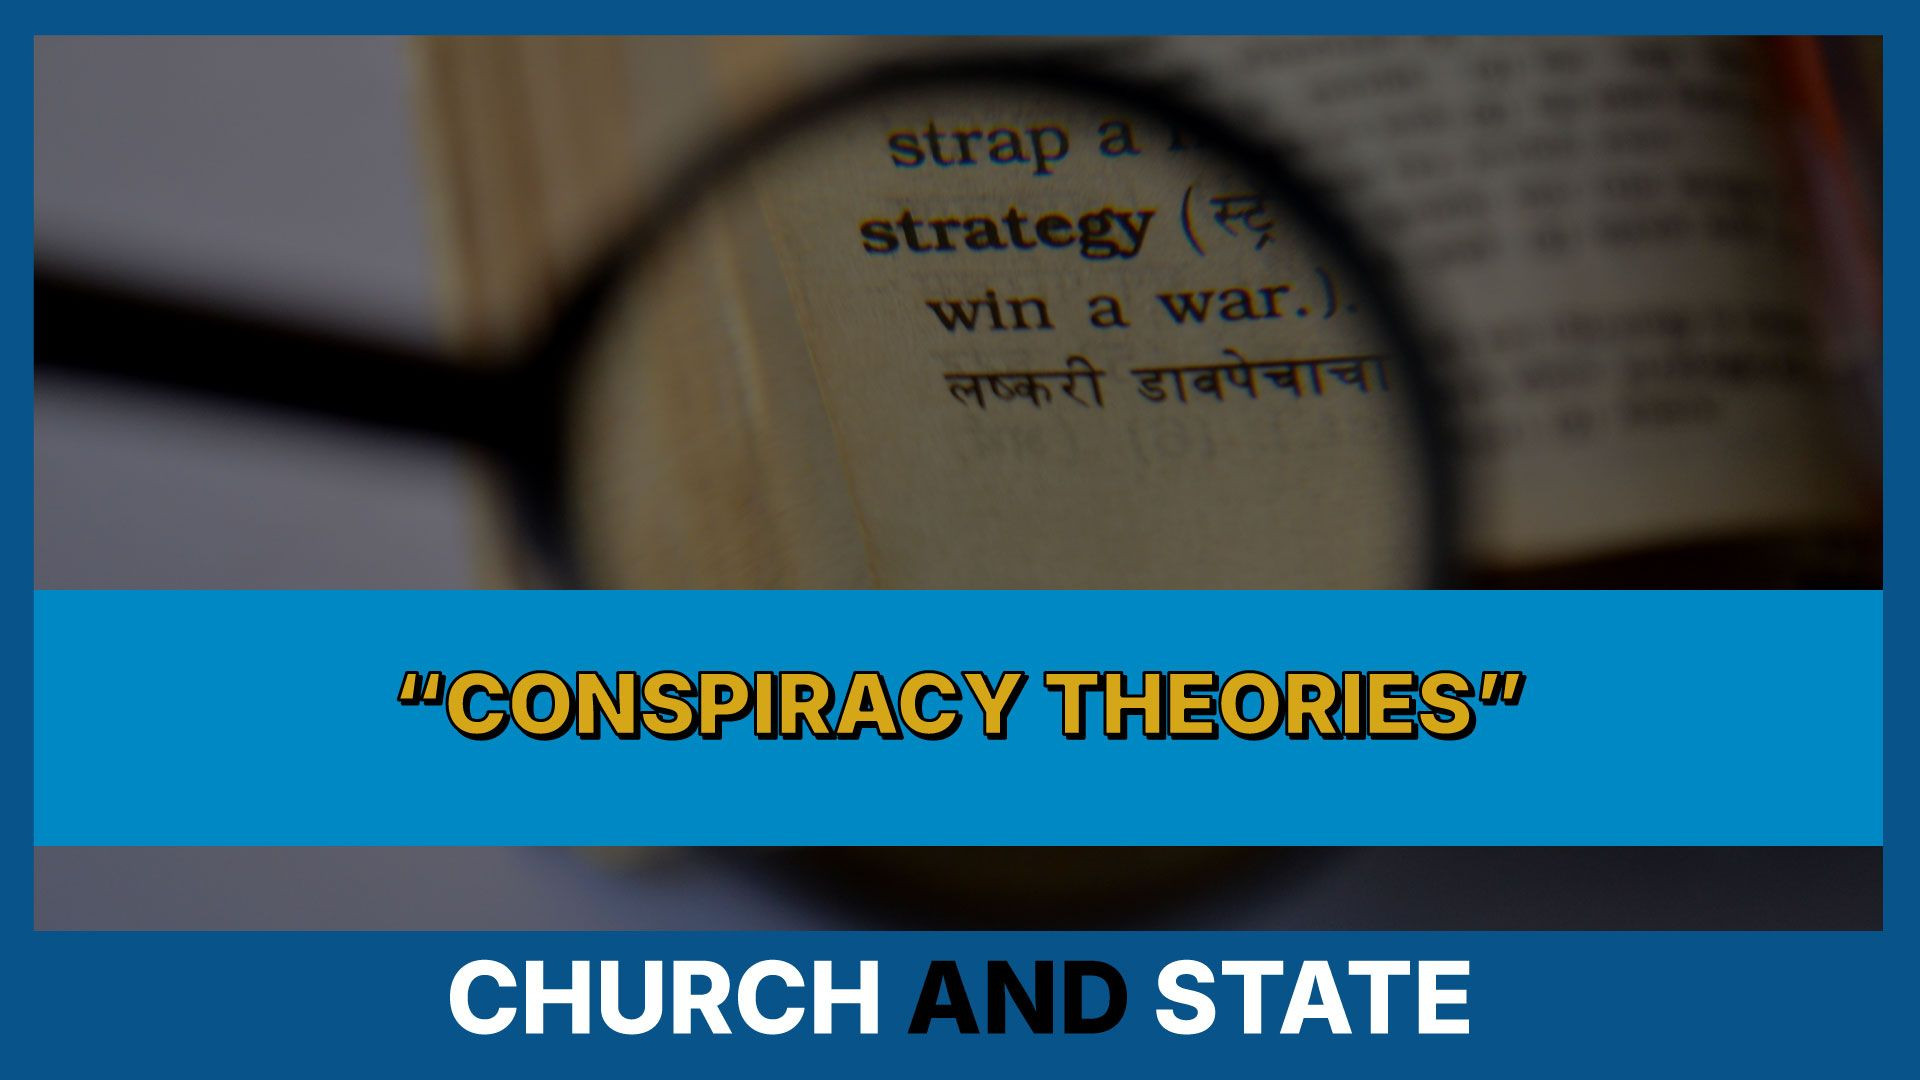 ⁣Let the conspiracy theories abound! | CS ep. 58